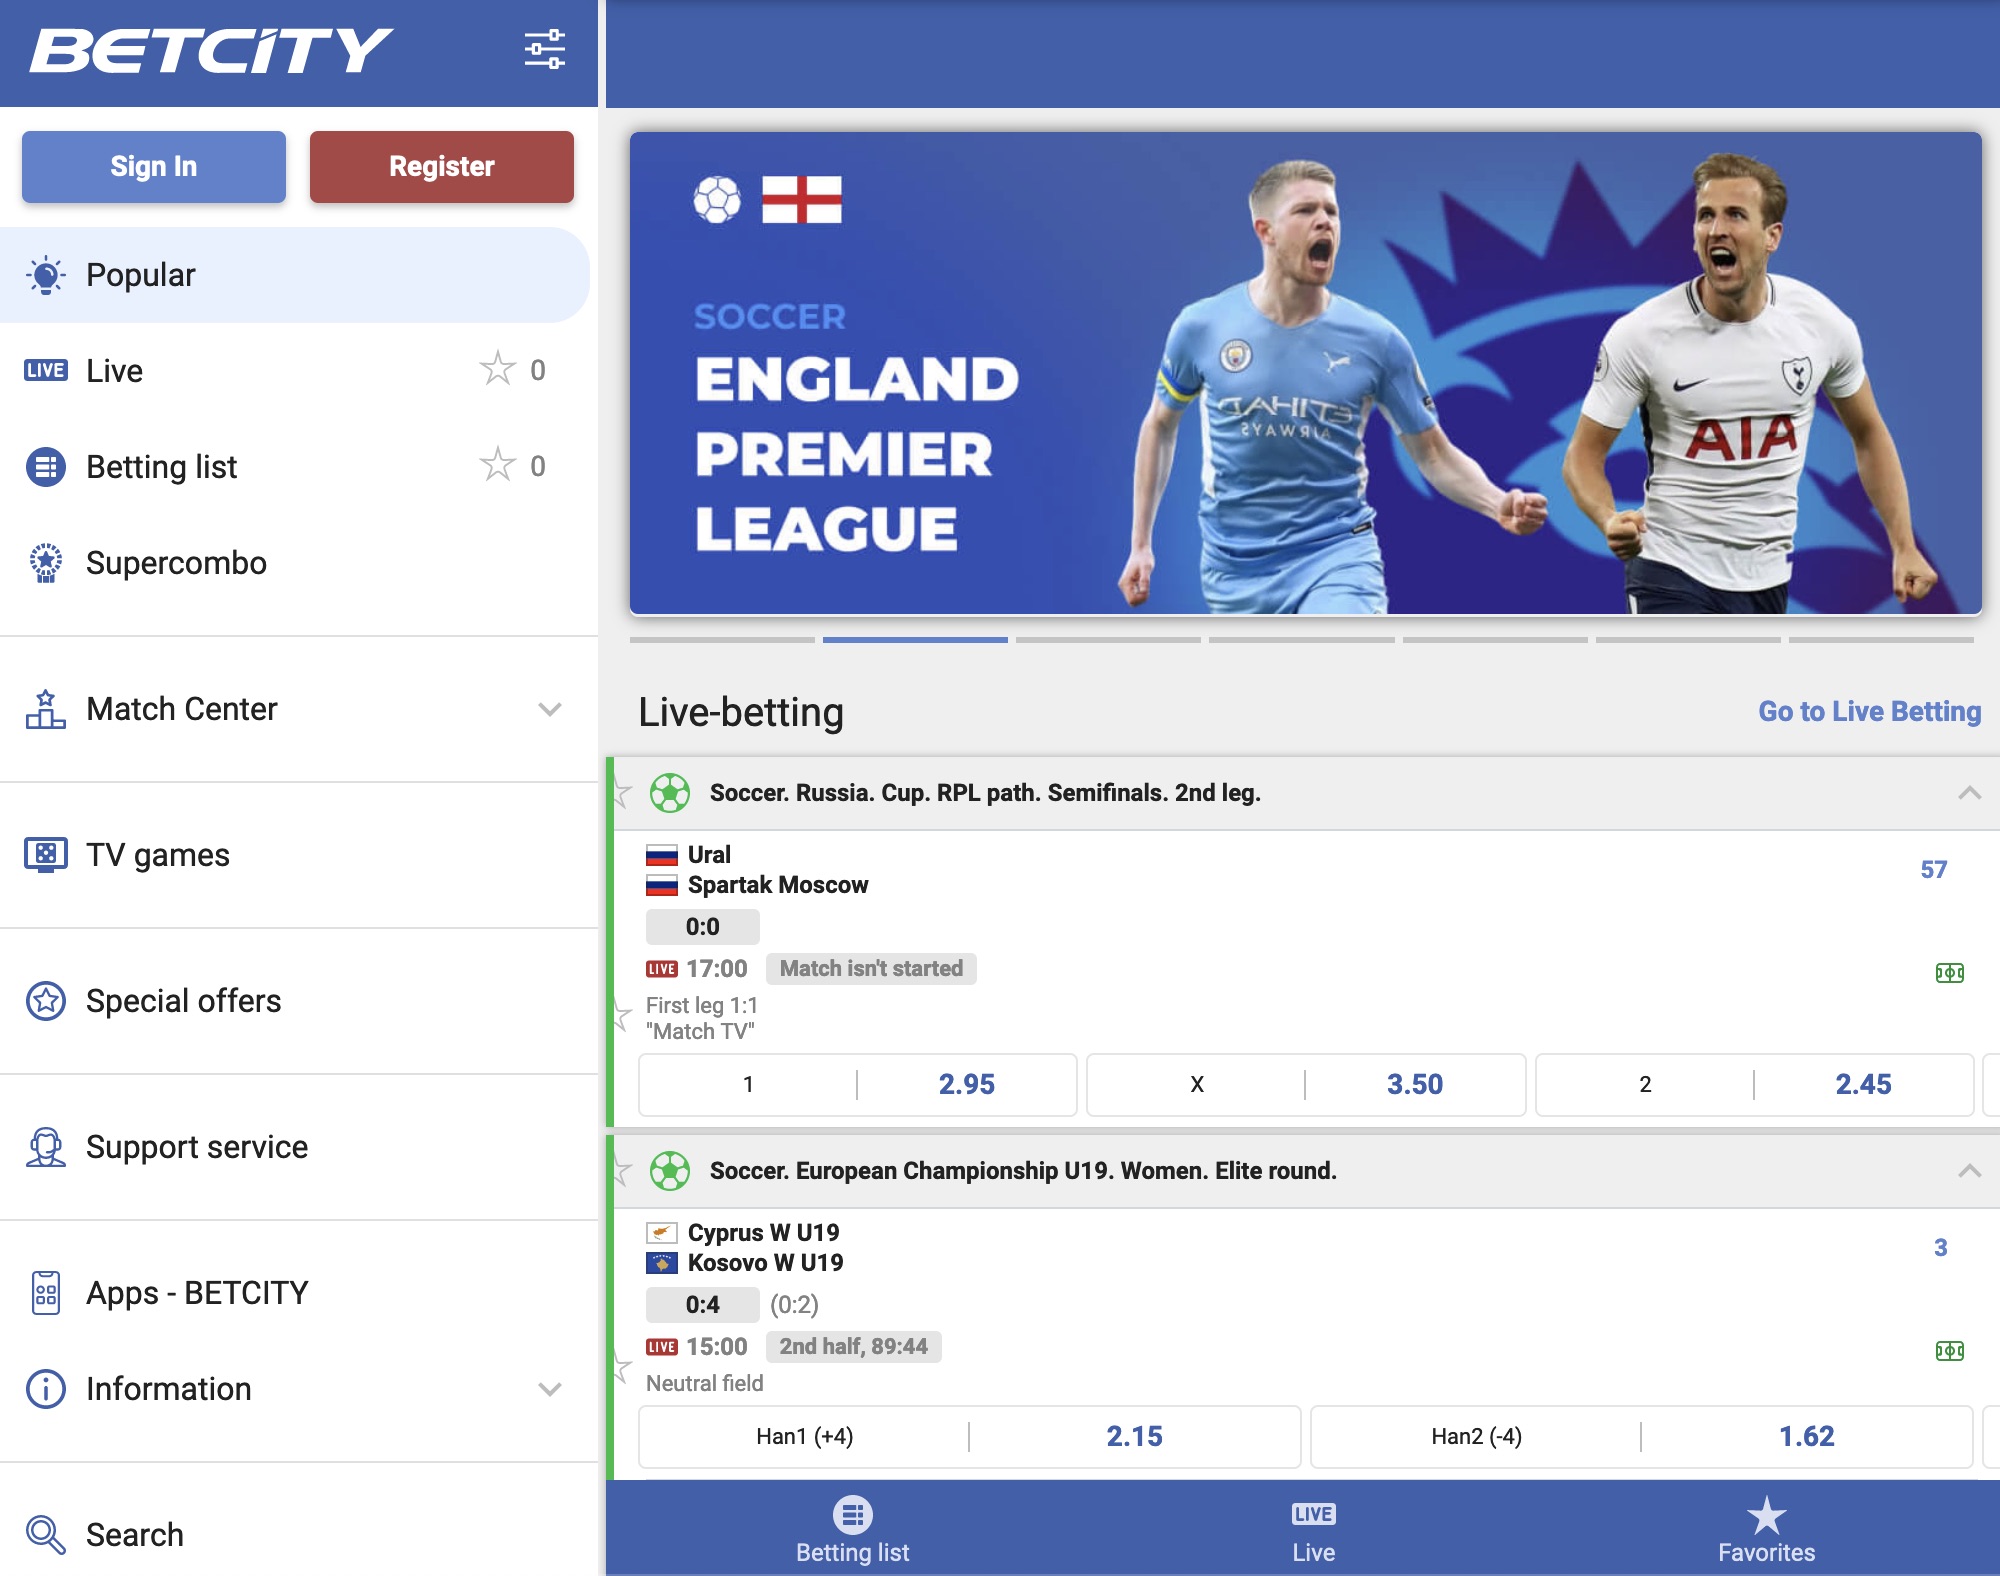 Mobile version of Betcity